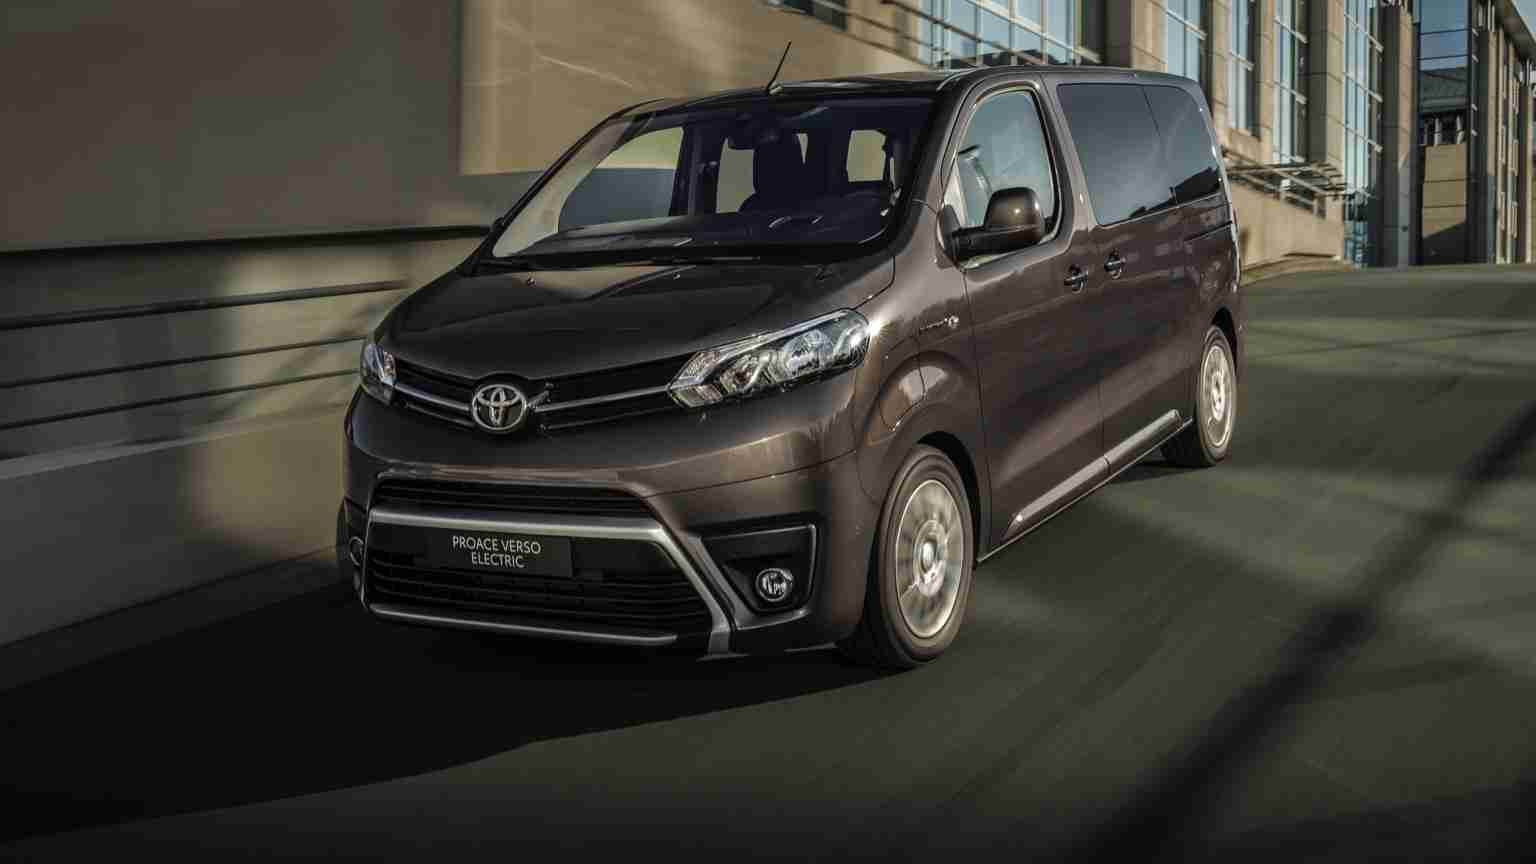 Toyota PROACE Verso M 75 kWh Electric Car